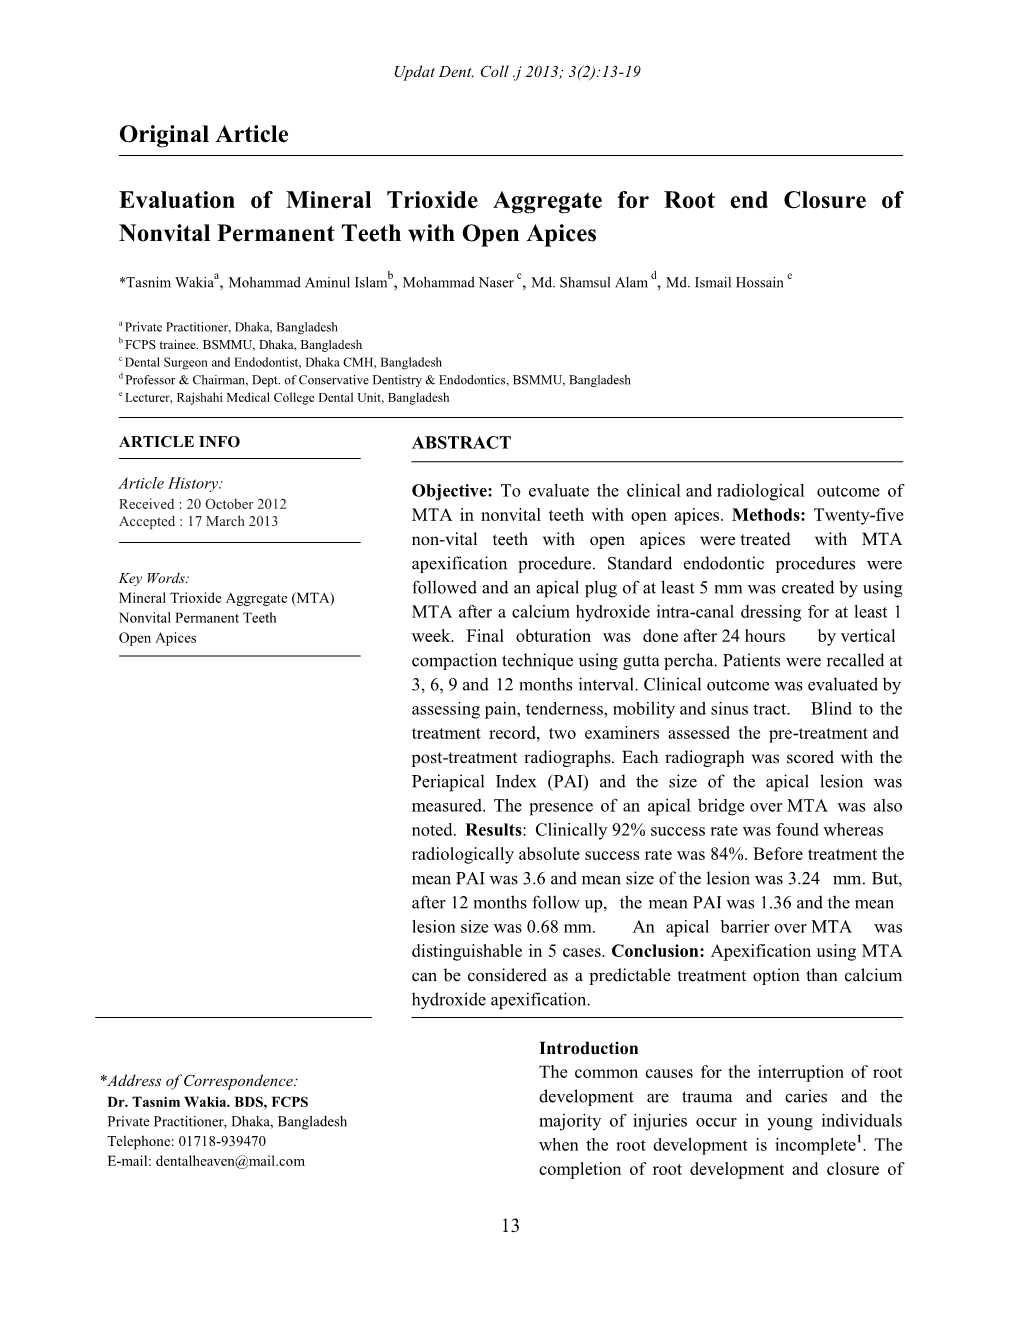 Original Article Evaluation of Mineral Trioxide Aggregate for Root End